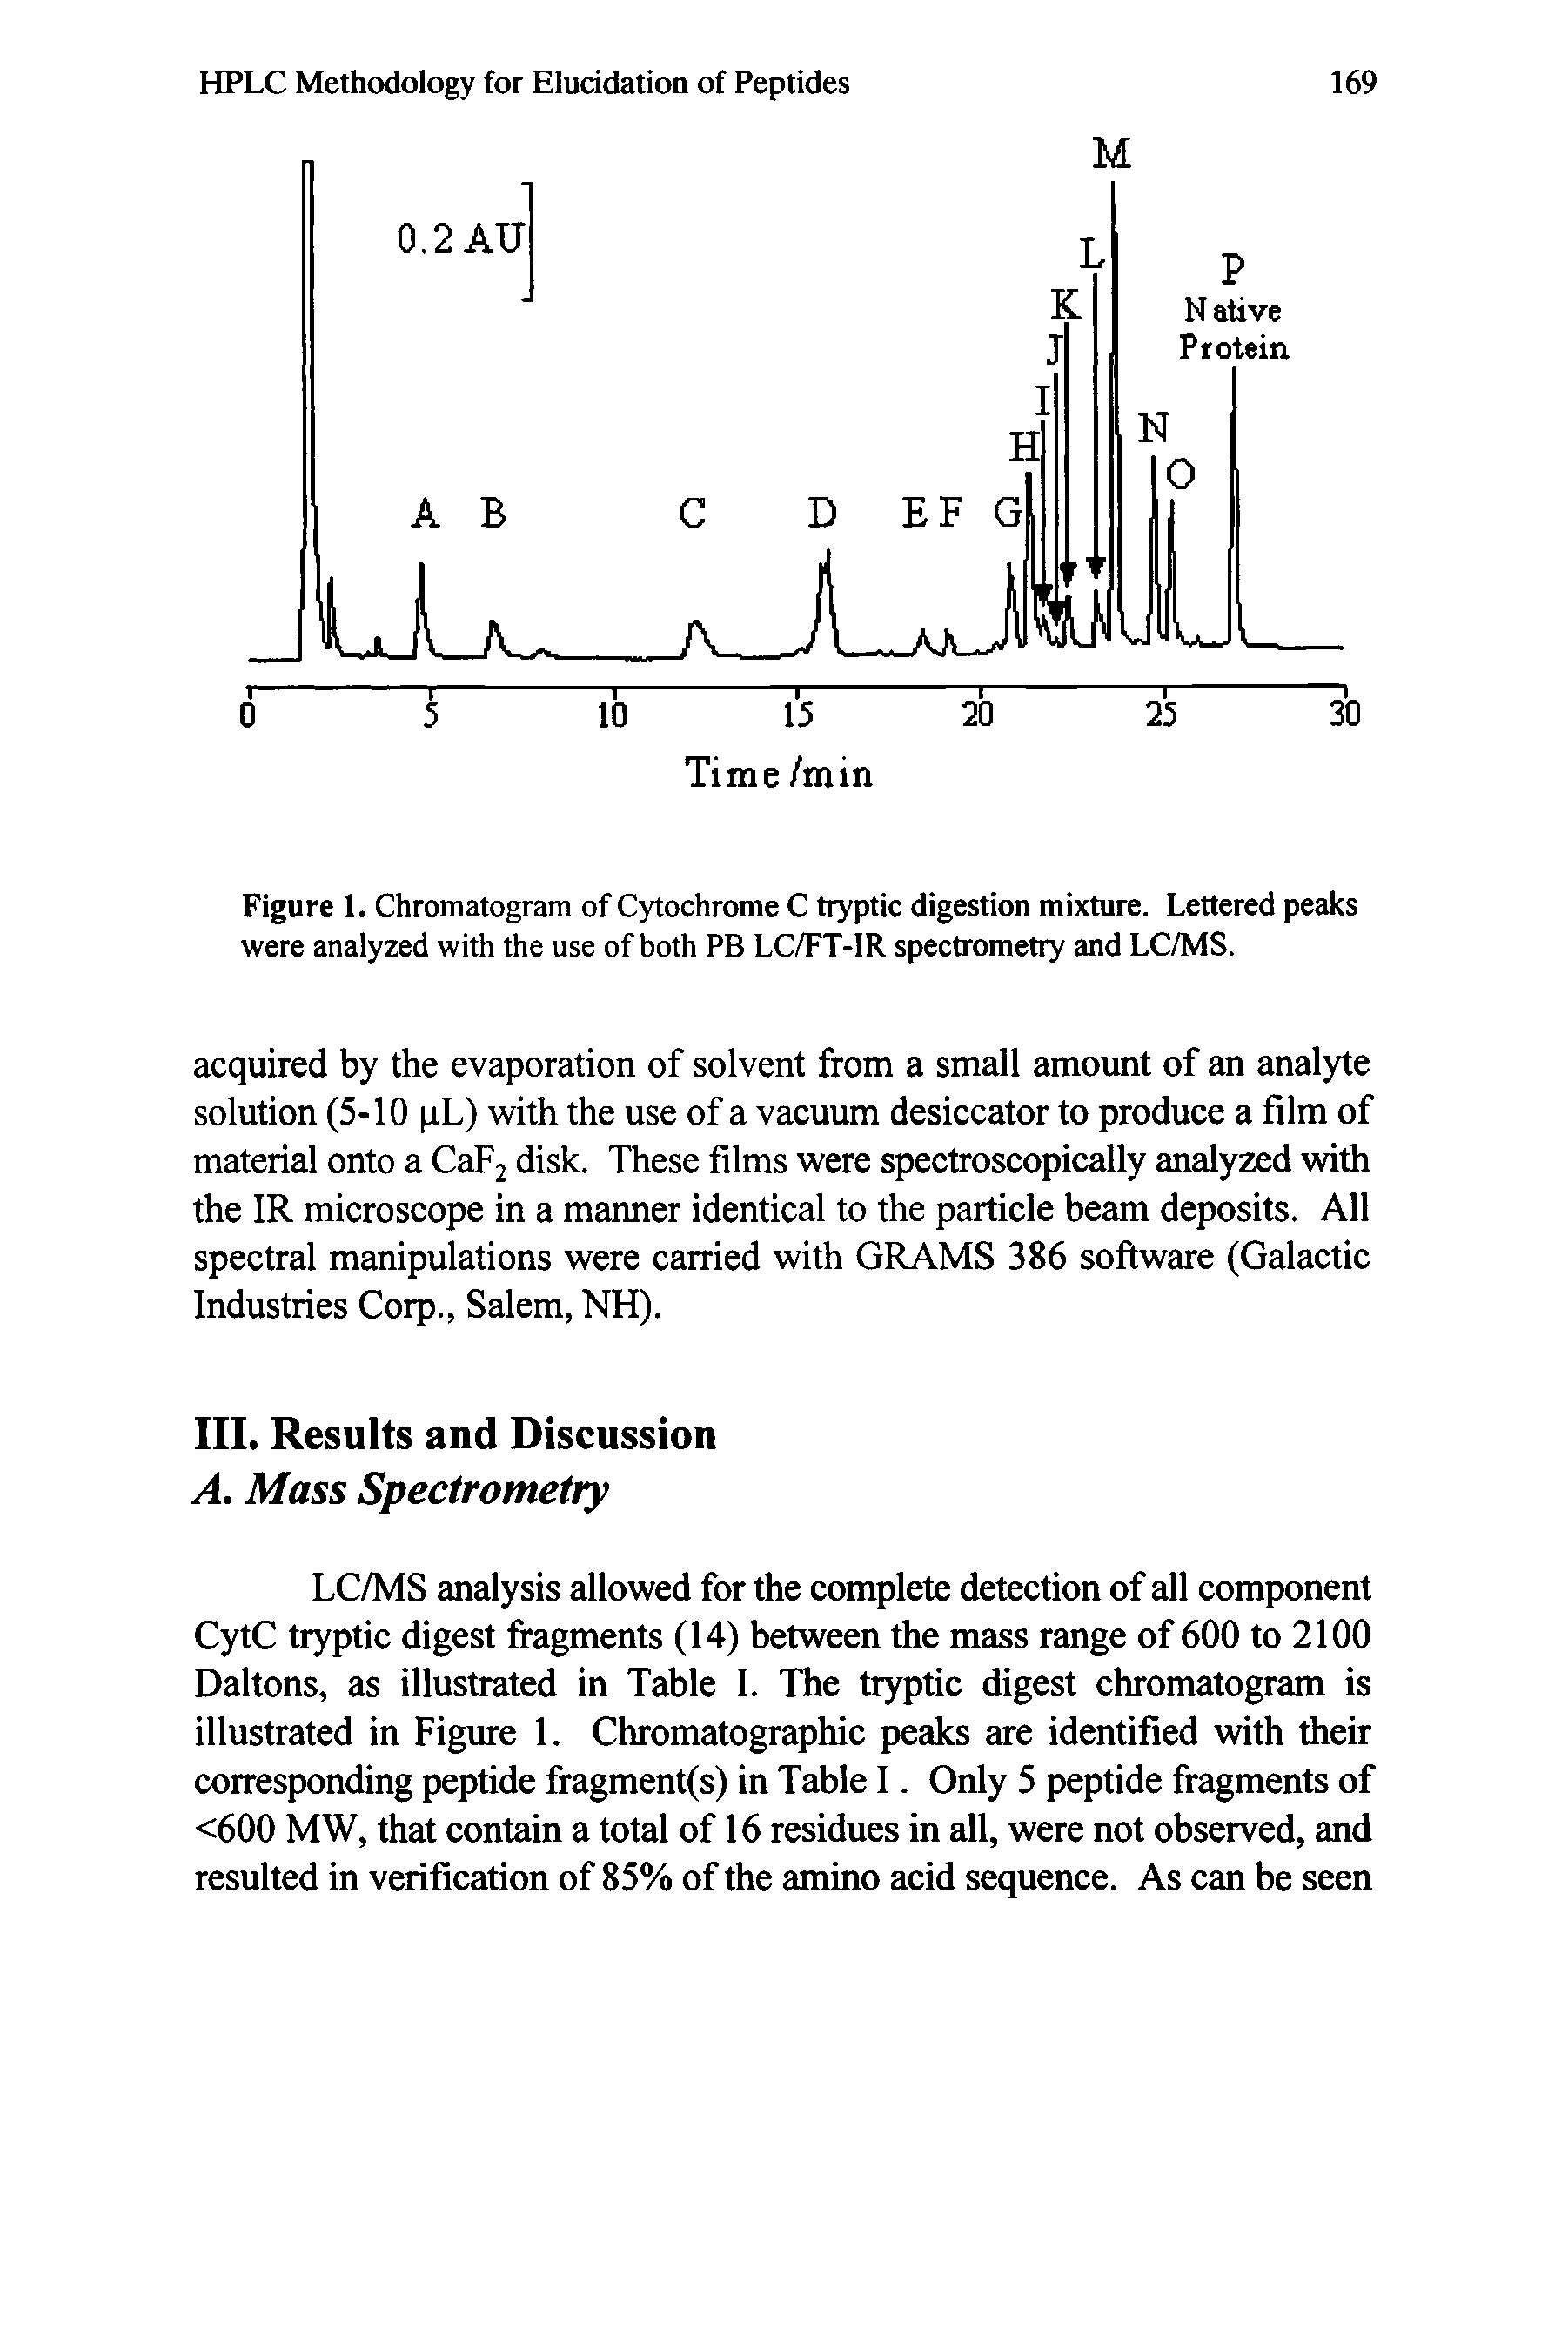 Figure 1. Chromatogram of Cytochrome C tryptic digestion mixture. Lettered peaks were analyzed with the use of both PB LC/FT-IR spectrometry and LC/MS.